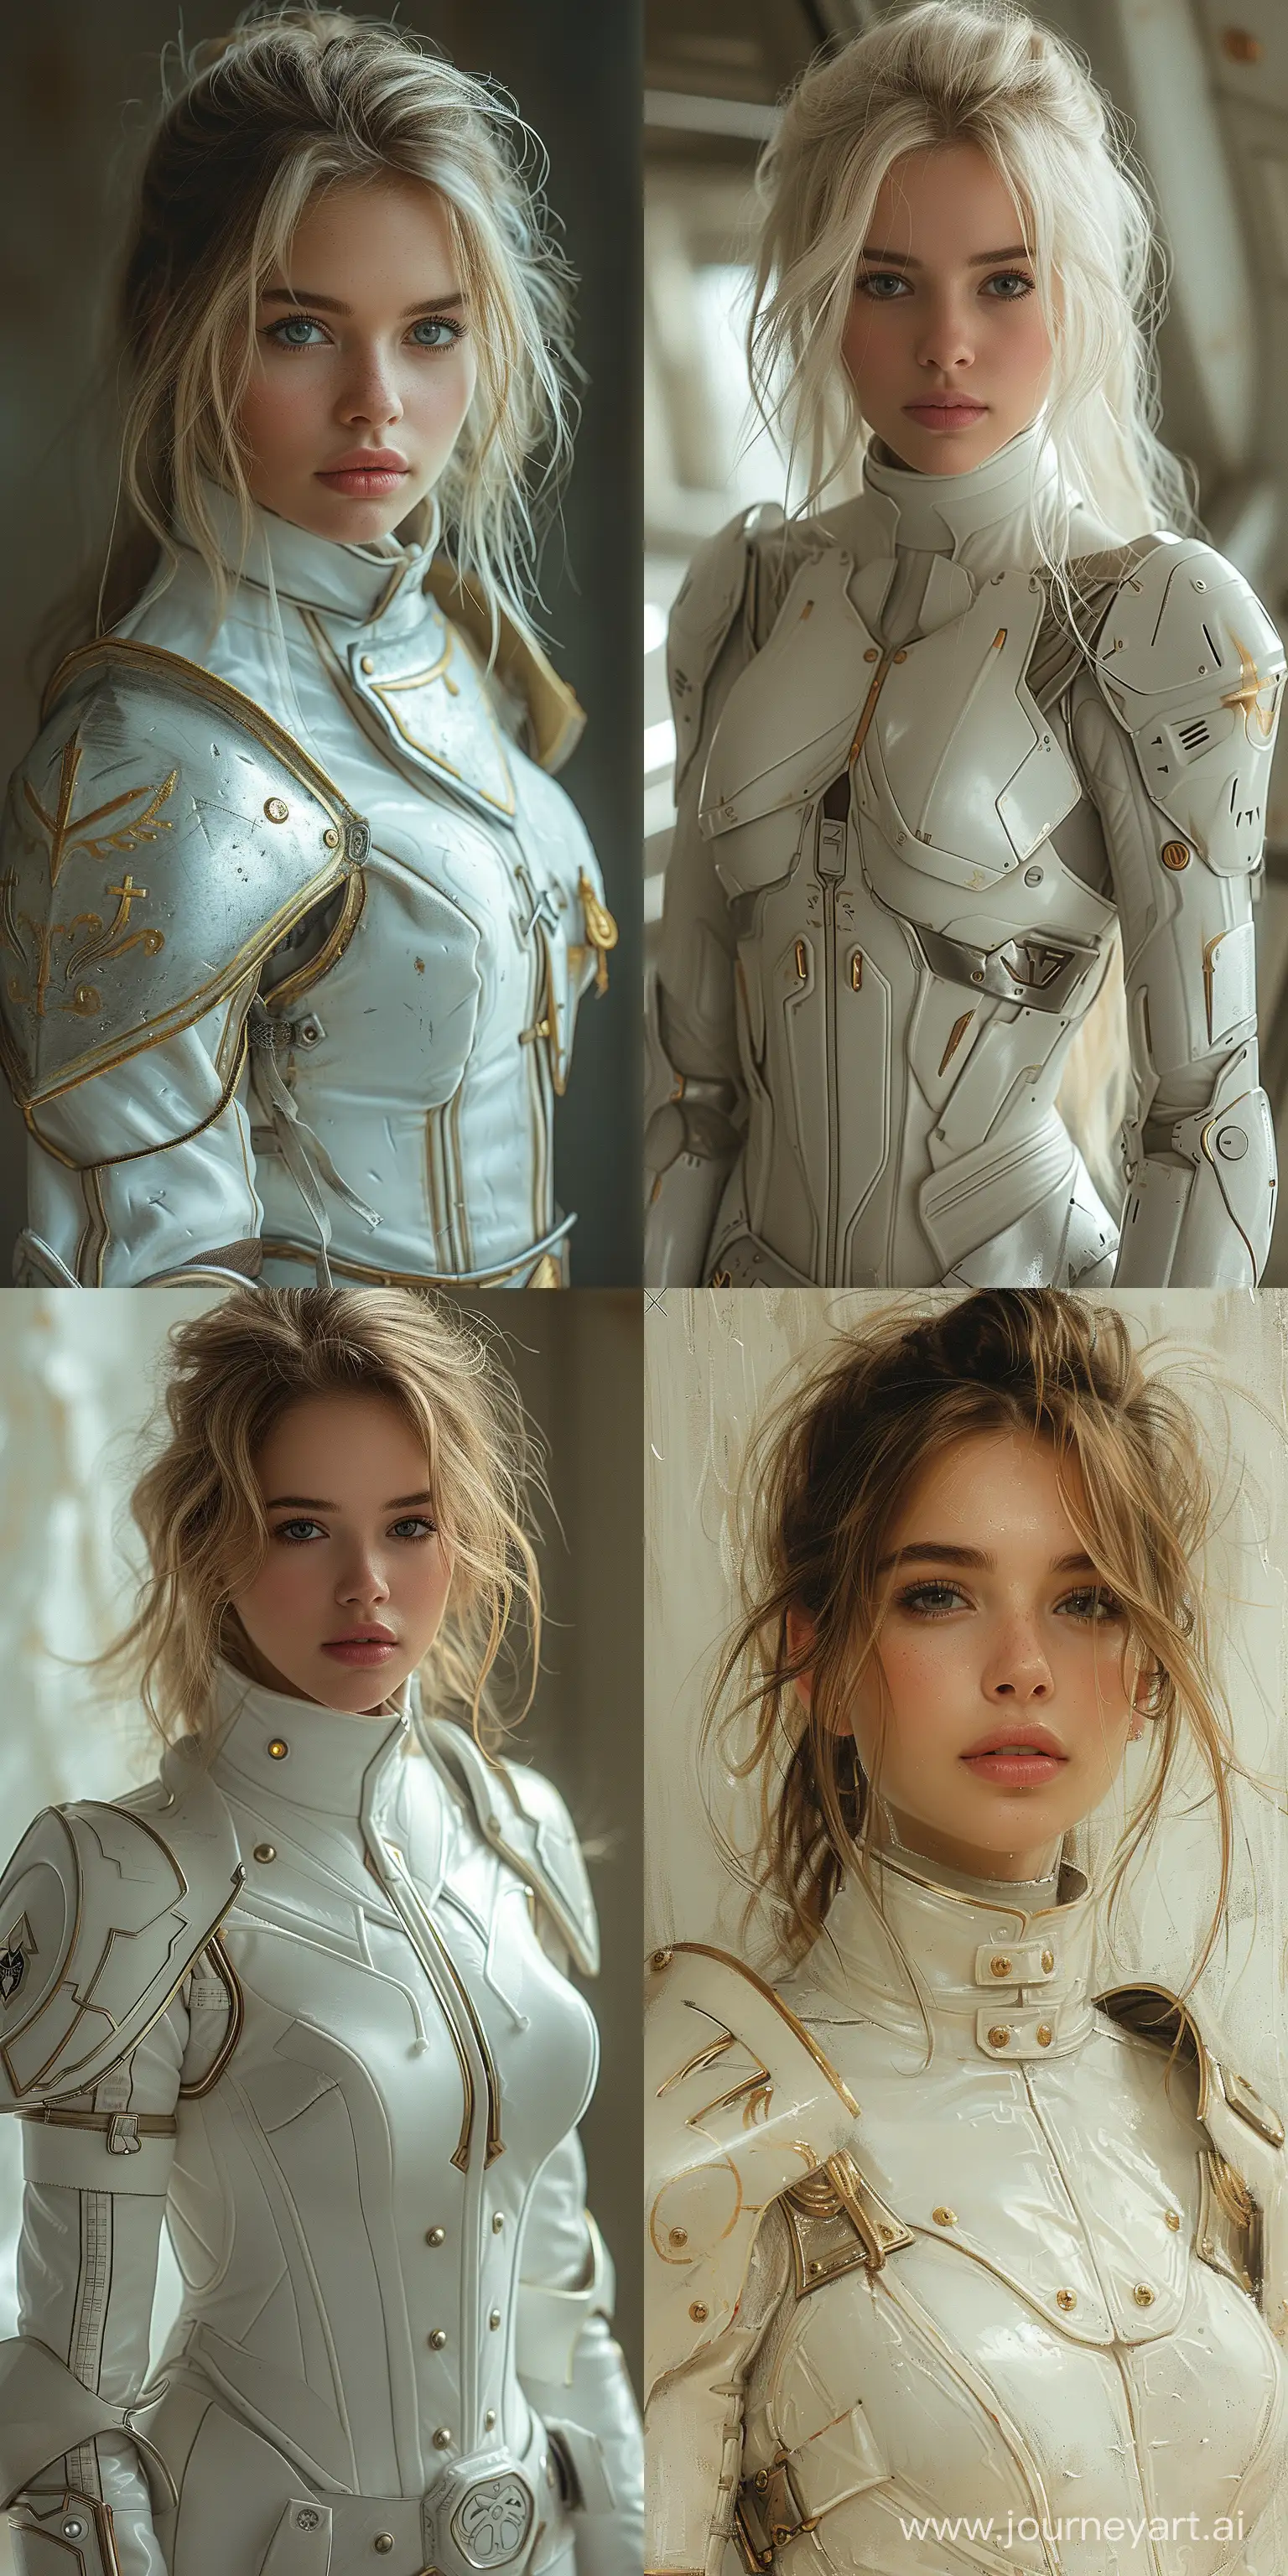 Dreamy-Princess-in-Y2K-Aesthetic-Armor-Ethereal-White-and-Silver-Fantasy